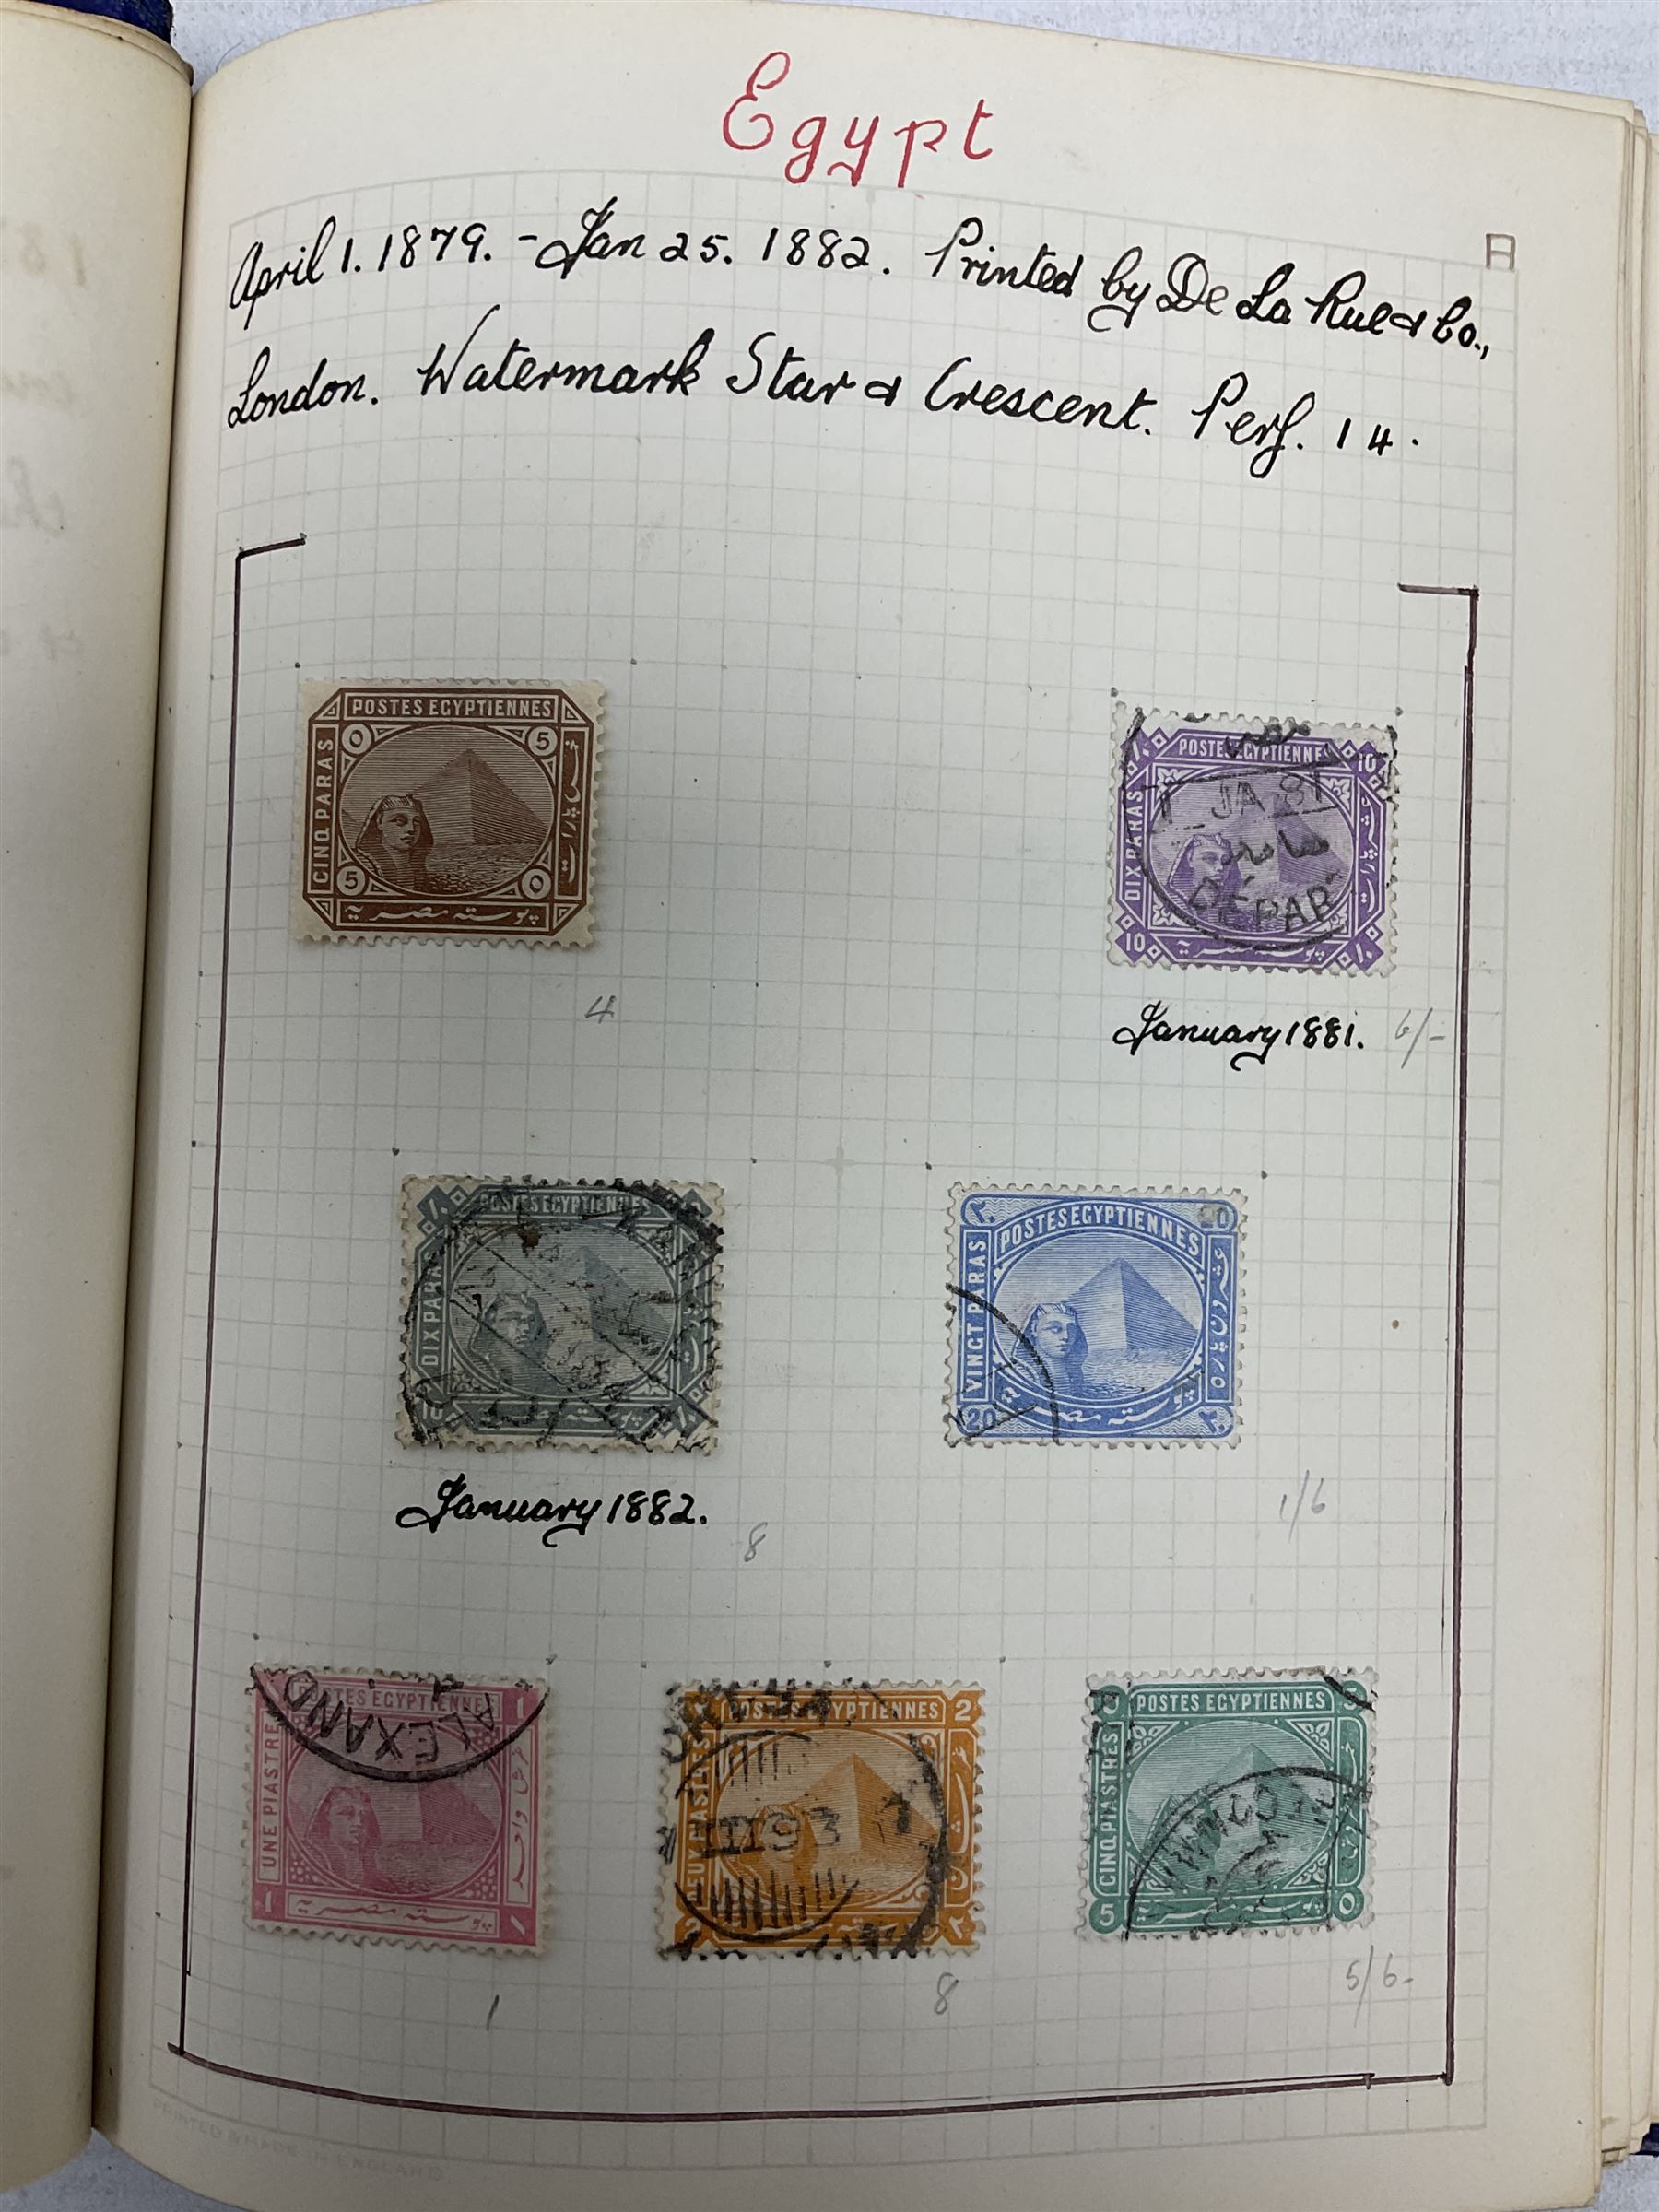 Egypt 1866 and later stamps - Image 466 of 761